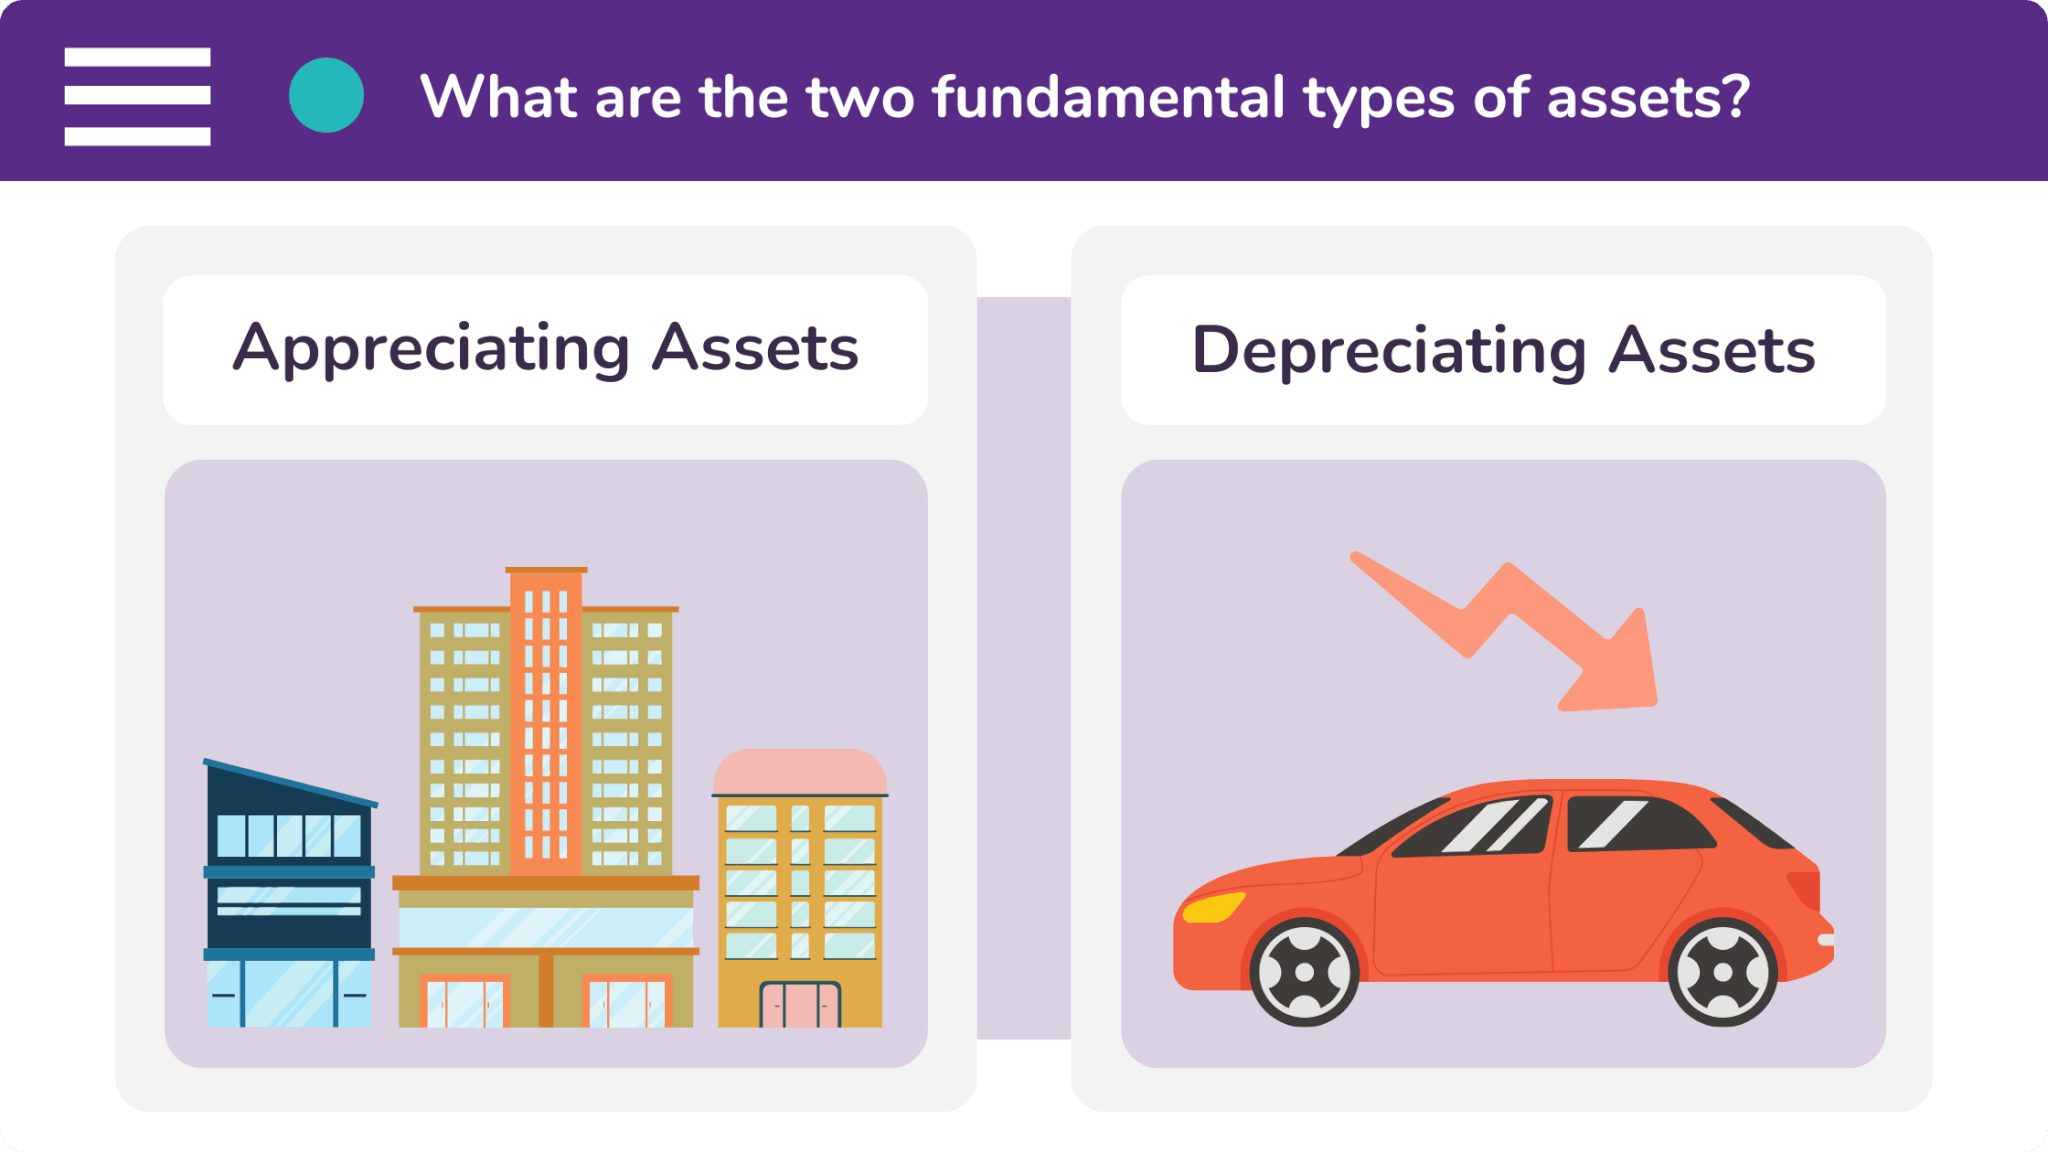 The two fundamental types of assets are appreciating and depreciating.